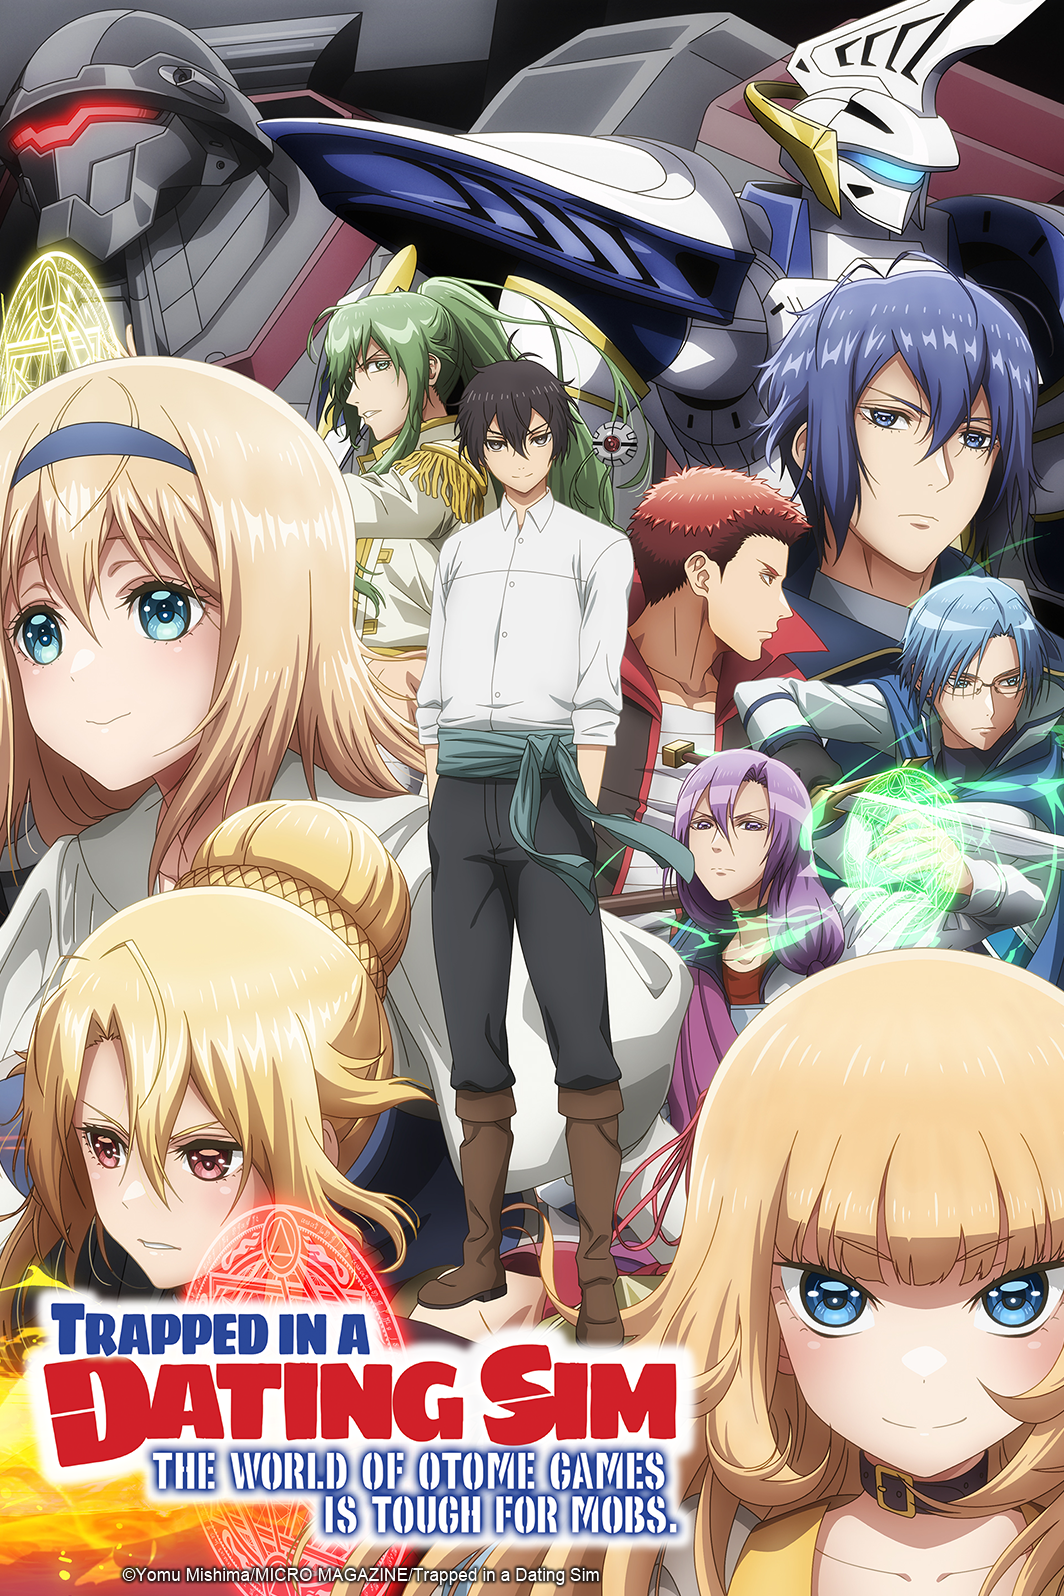 Funimation Sets Full Series Dub Debut Of The 'Otherside Picnic' Anime